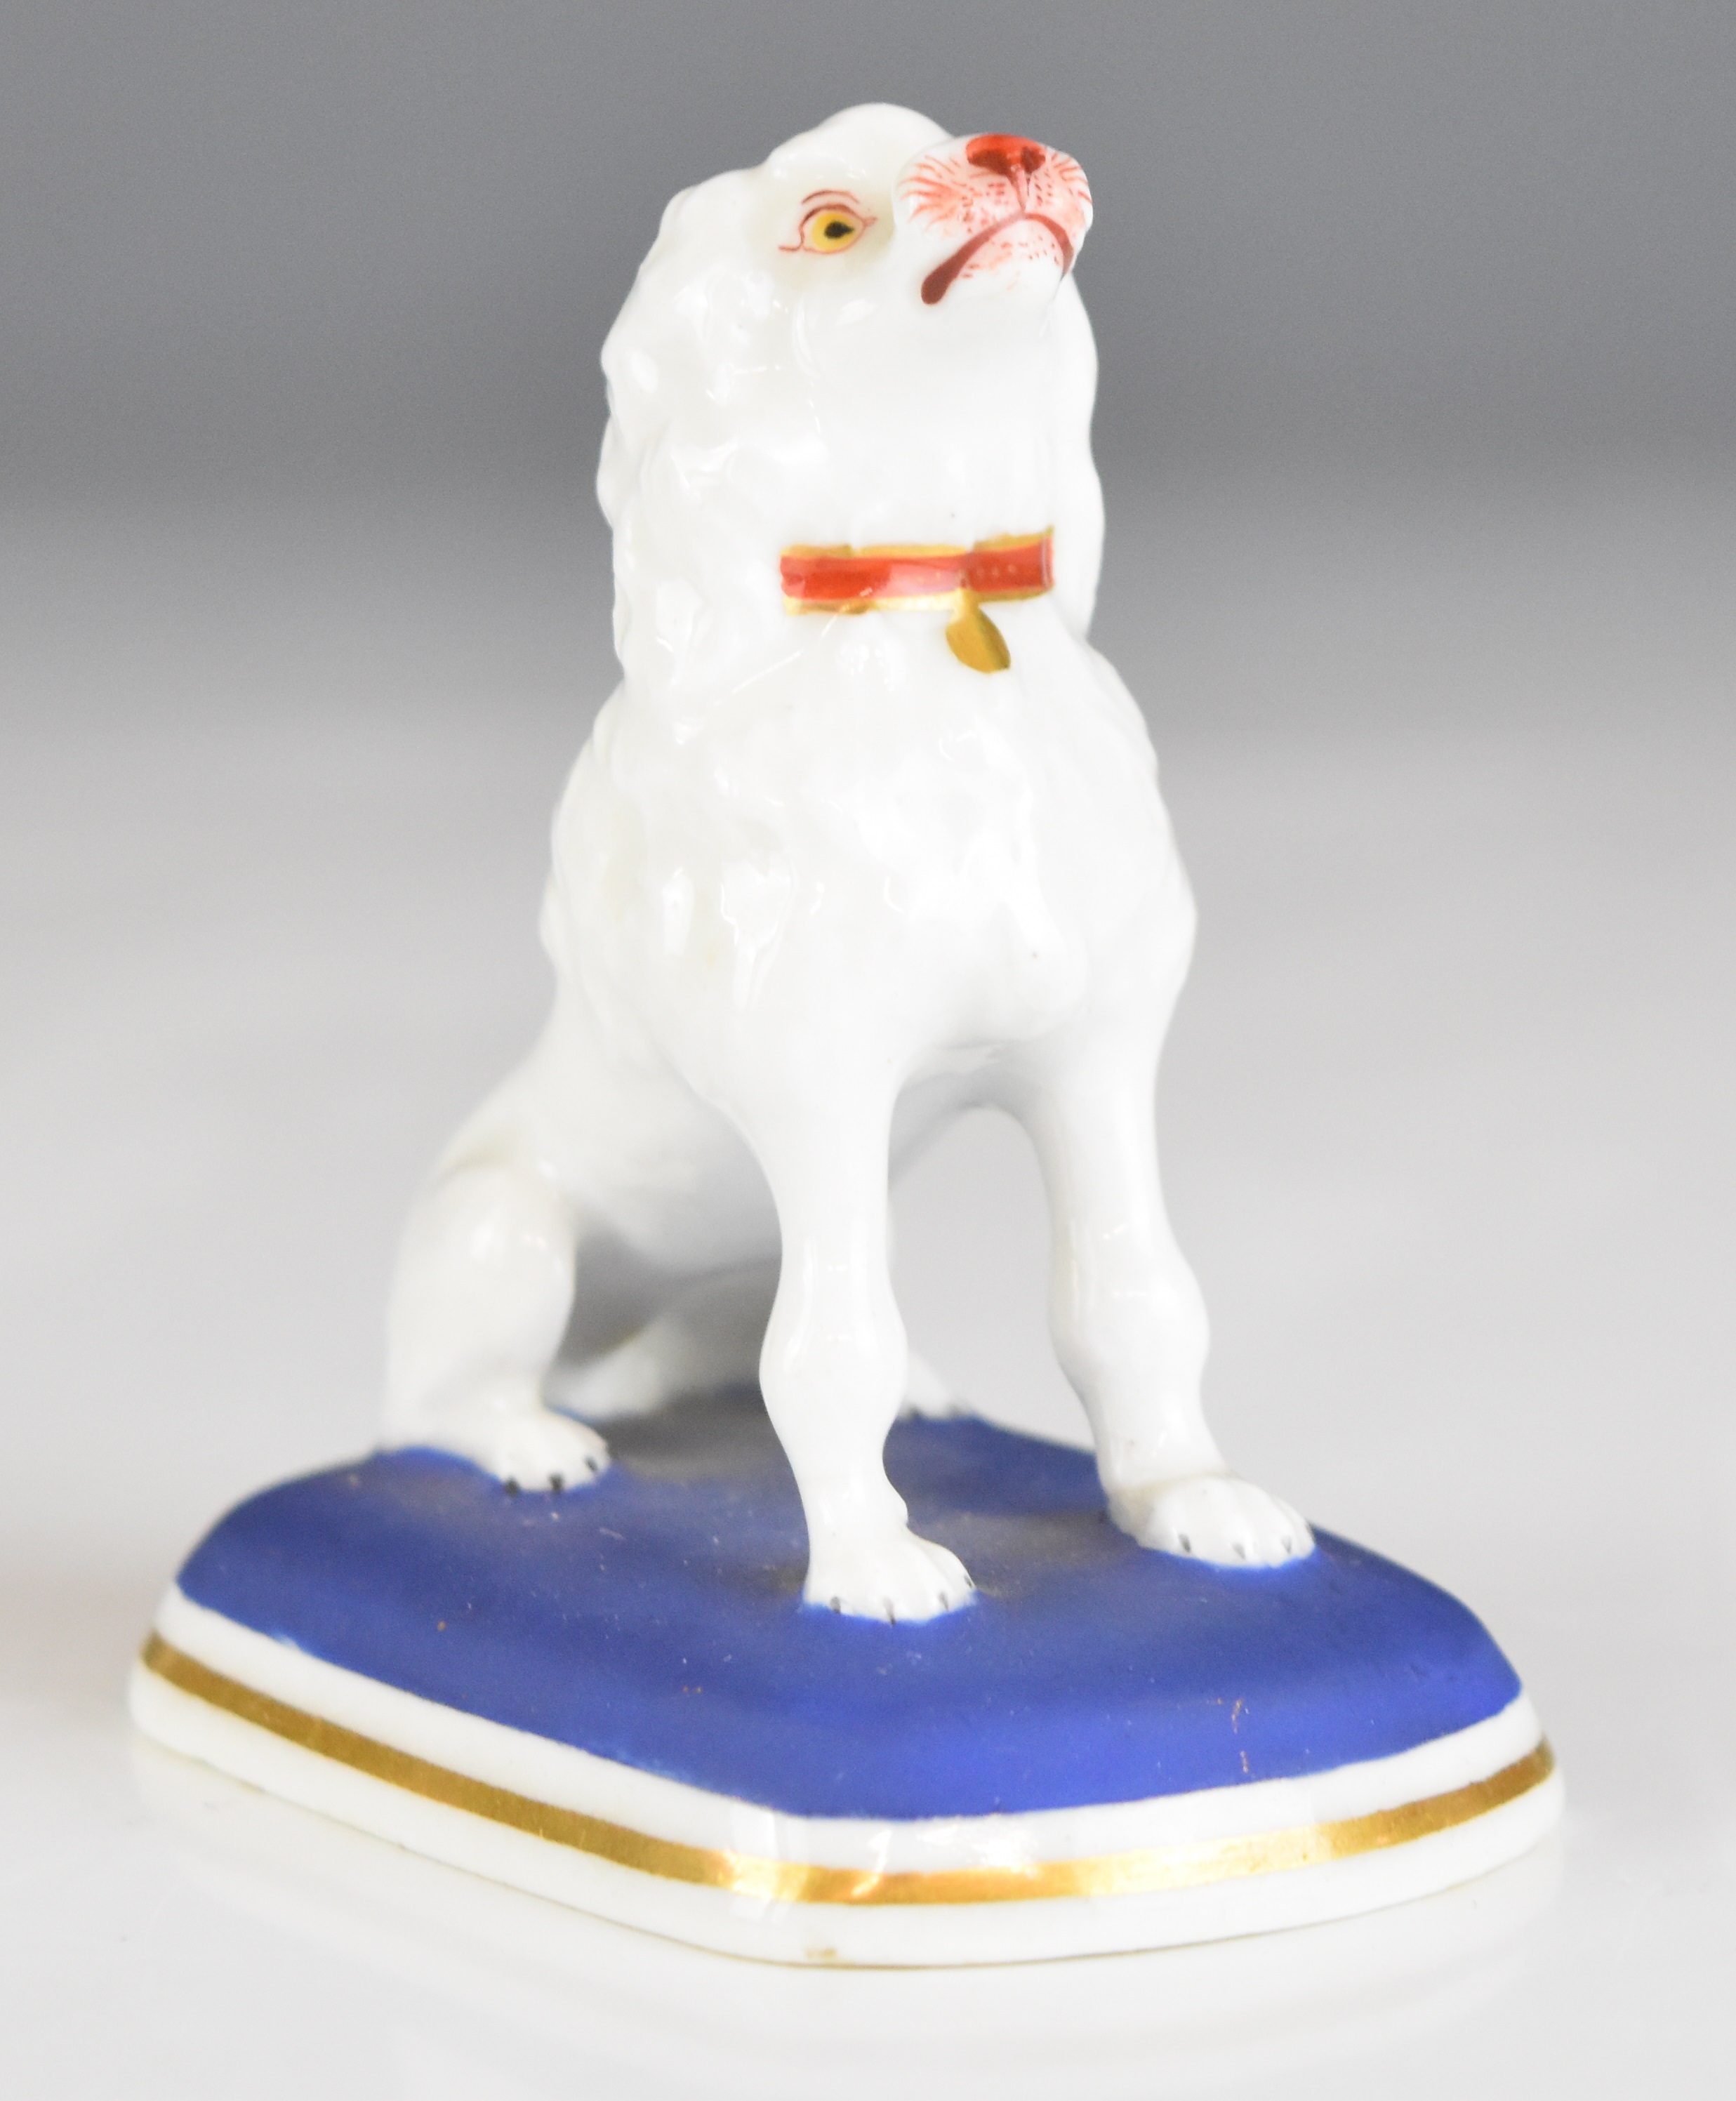 Chamberlains Worcester novelty miniature figure of a seated poodle / dog, height 7.5cm - Image 4 of 6